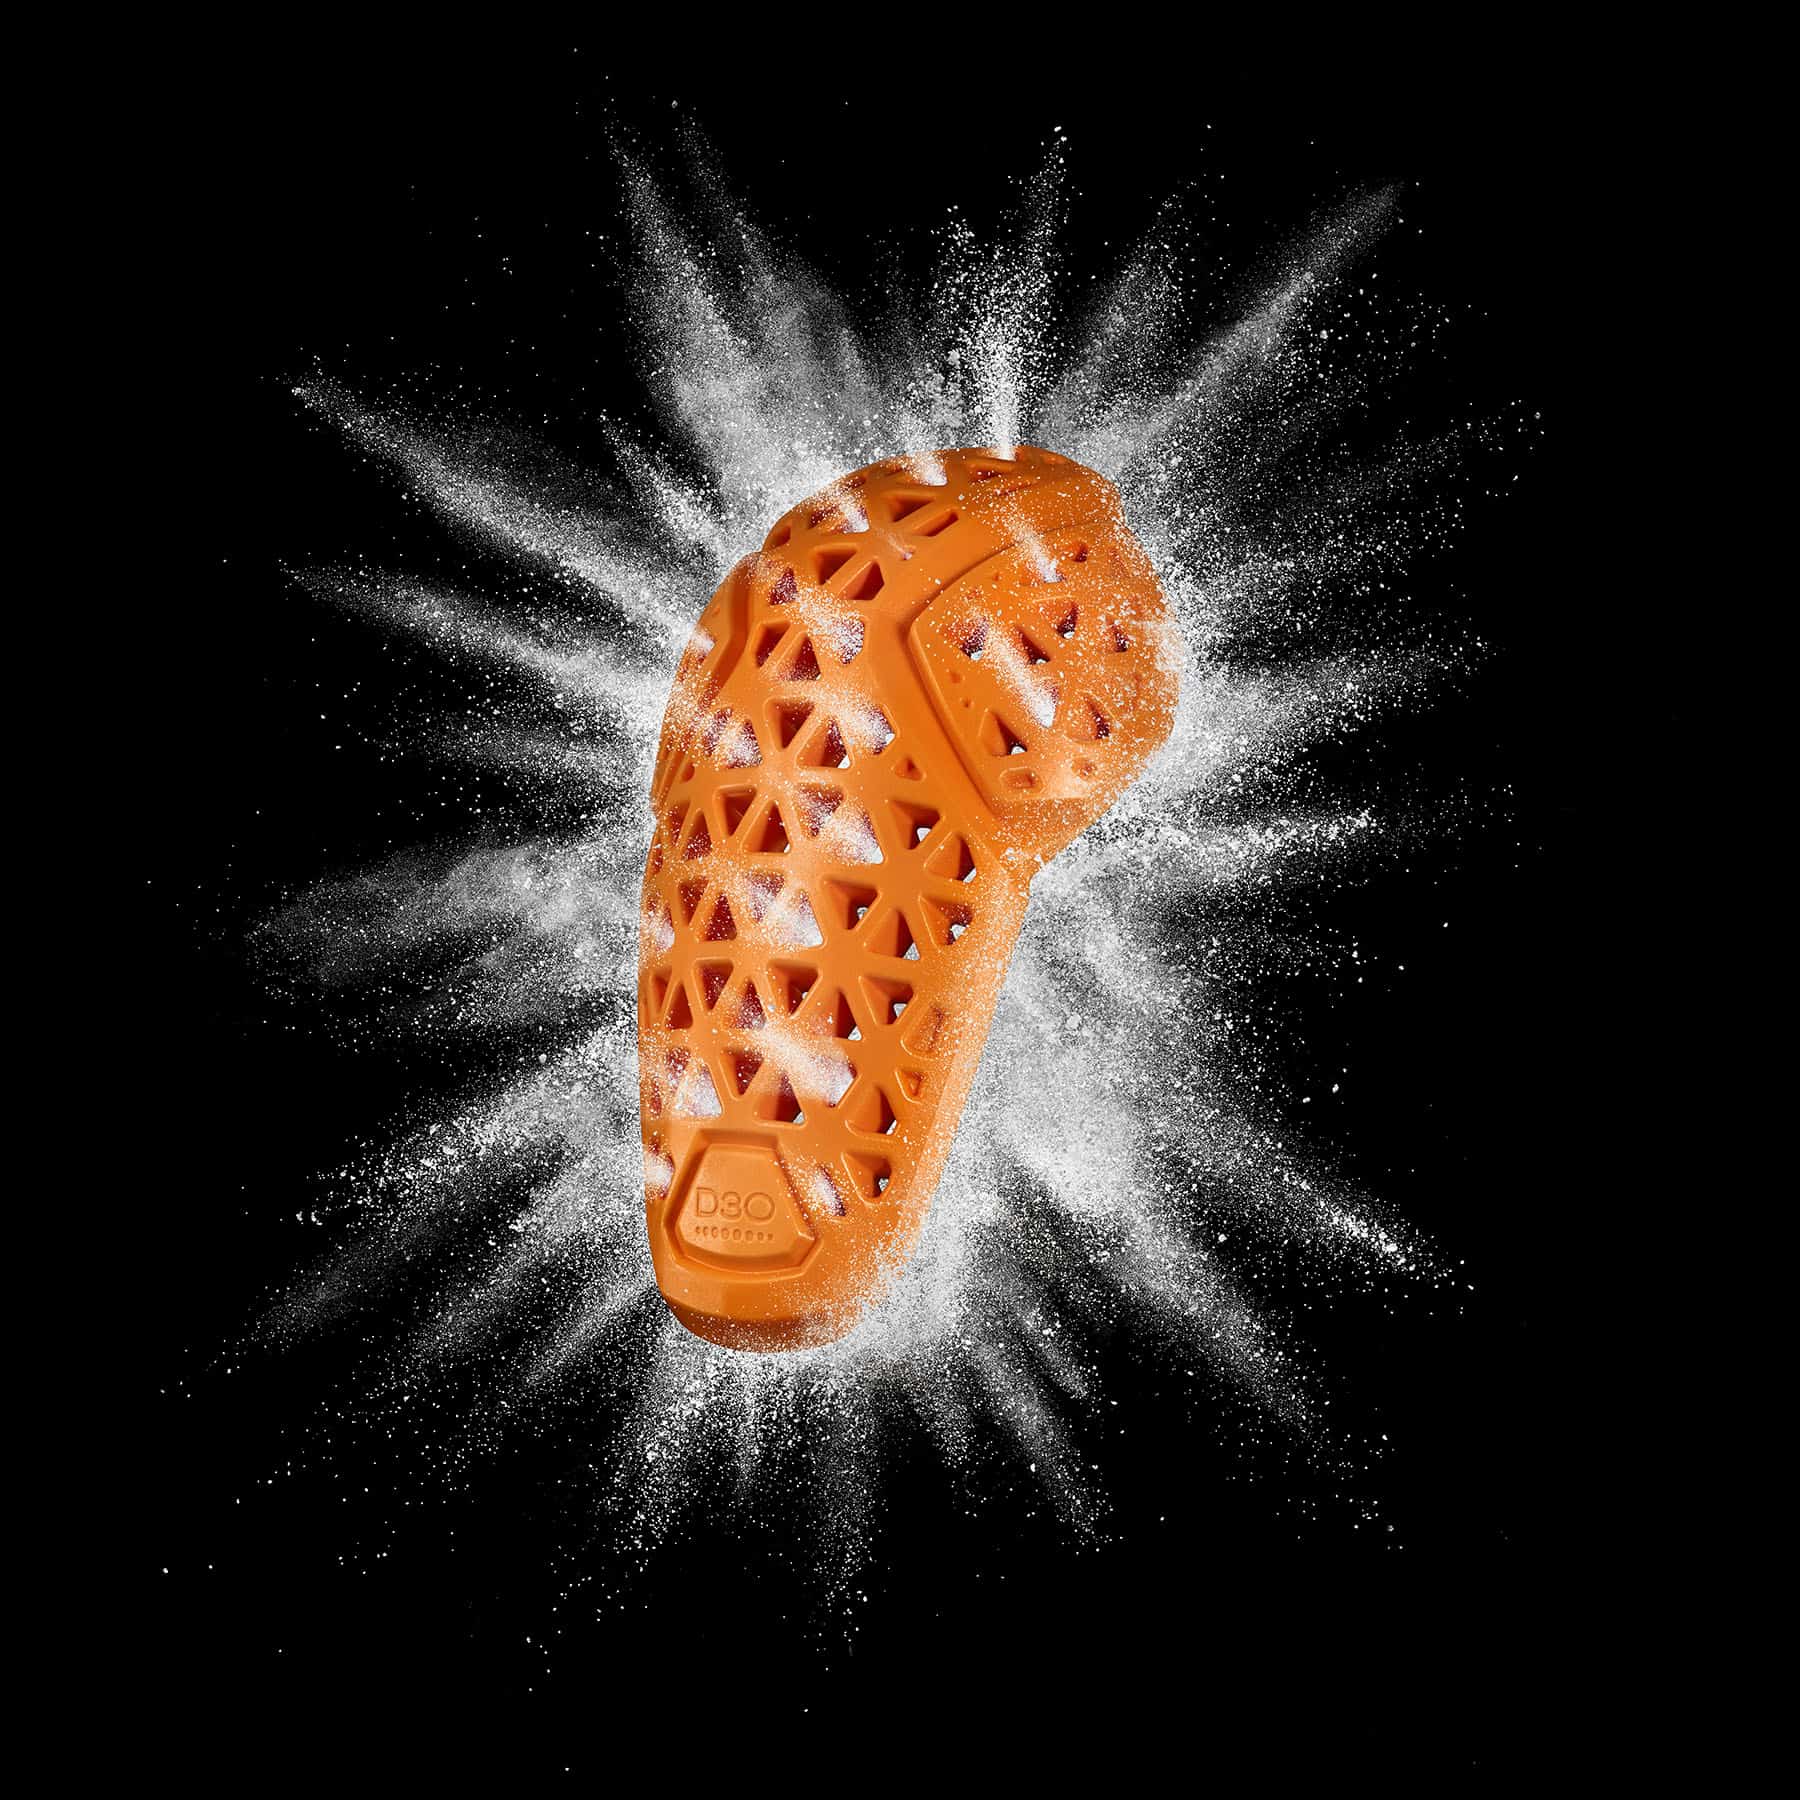 Black background image showing orange D3O elbow armour and breathability